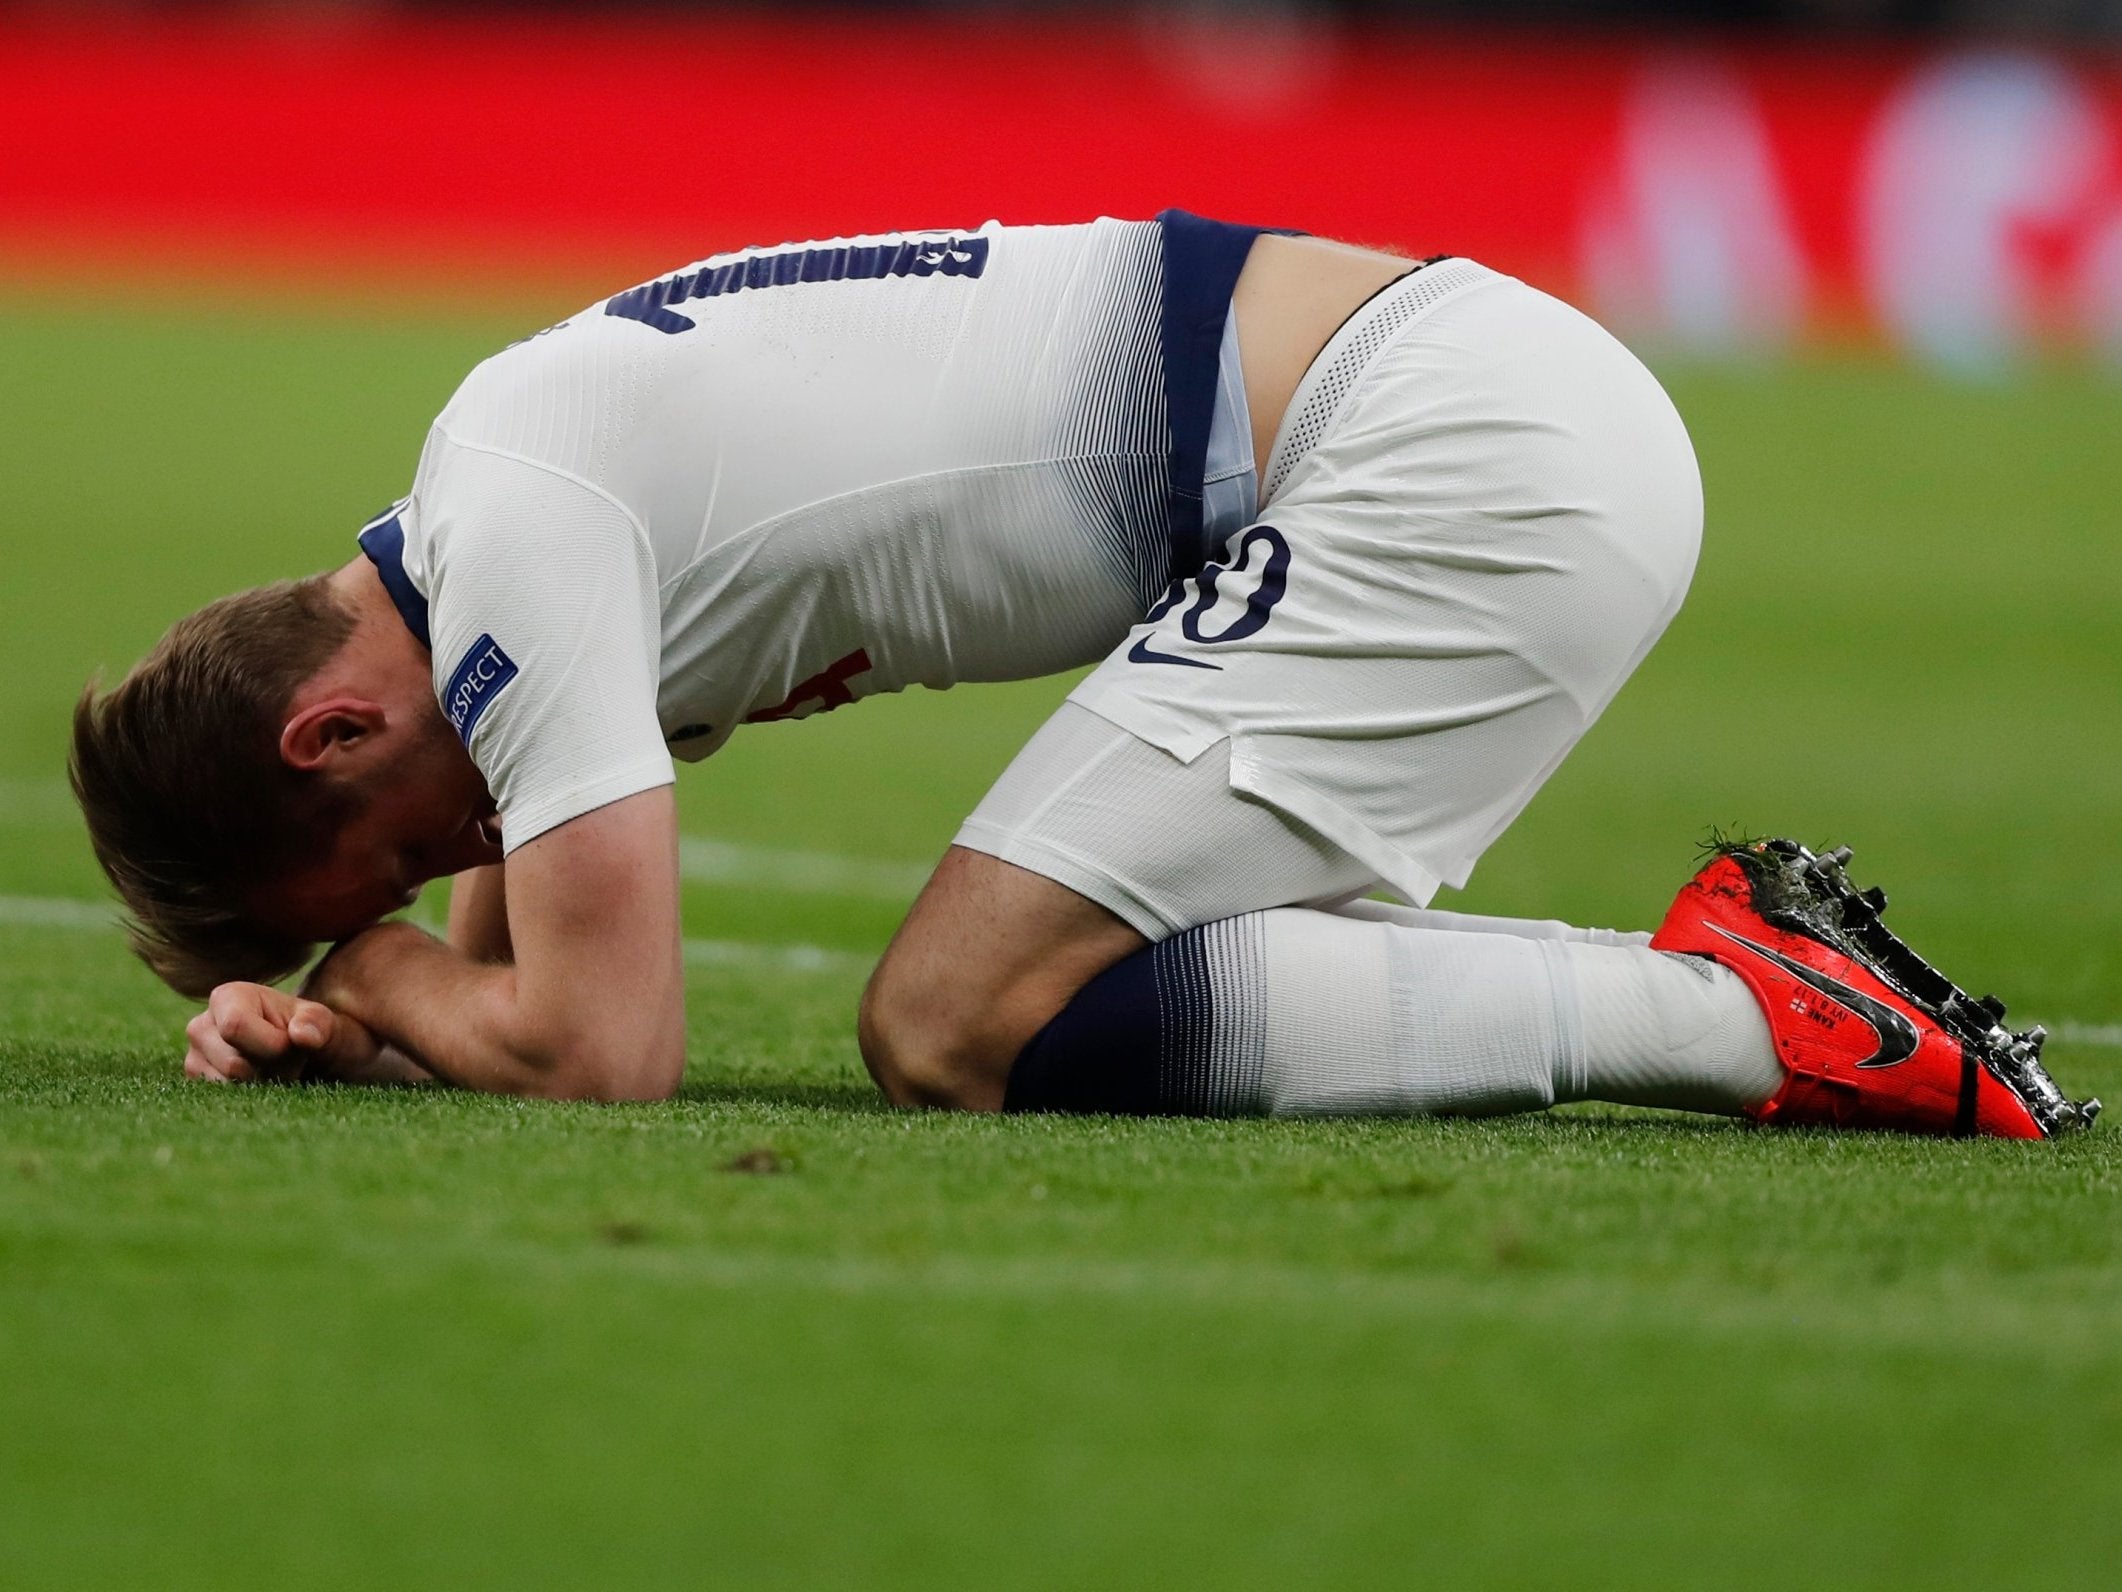 Harry Kane injury: Tottenham talisman limps off after challenge with Manchester City ...